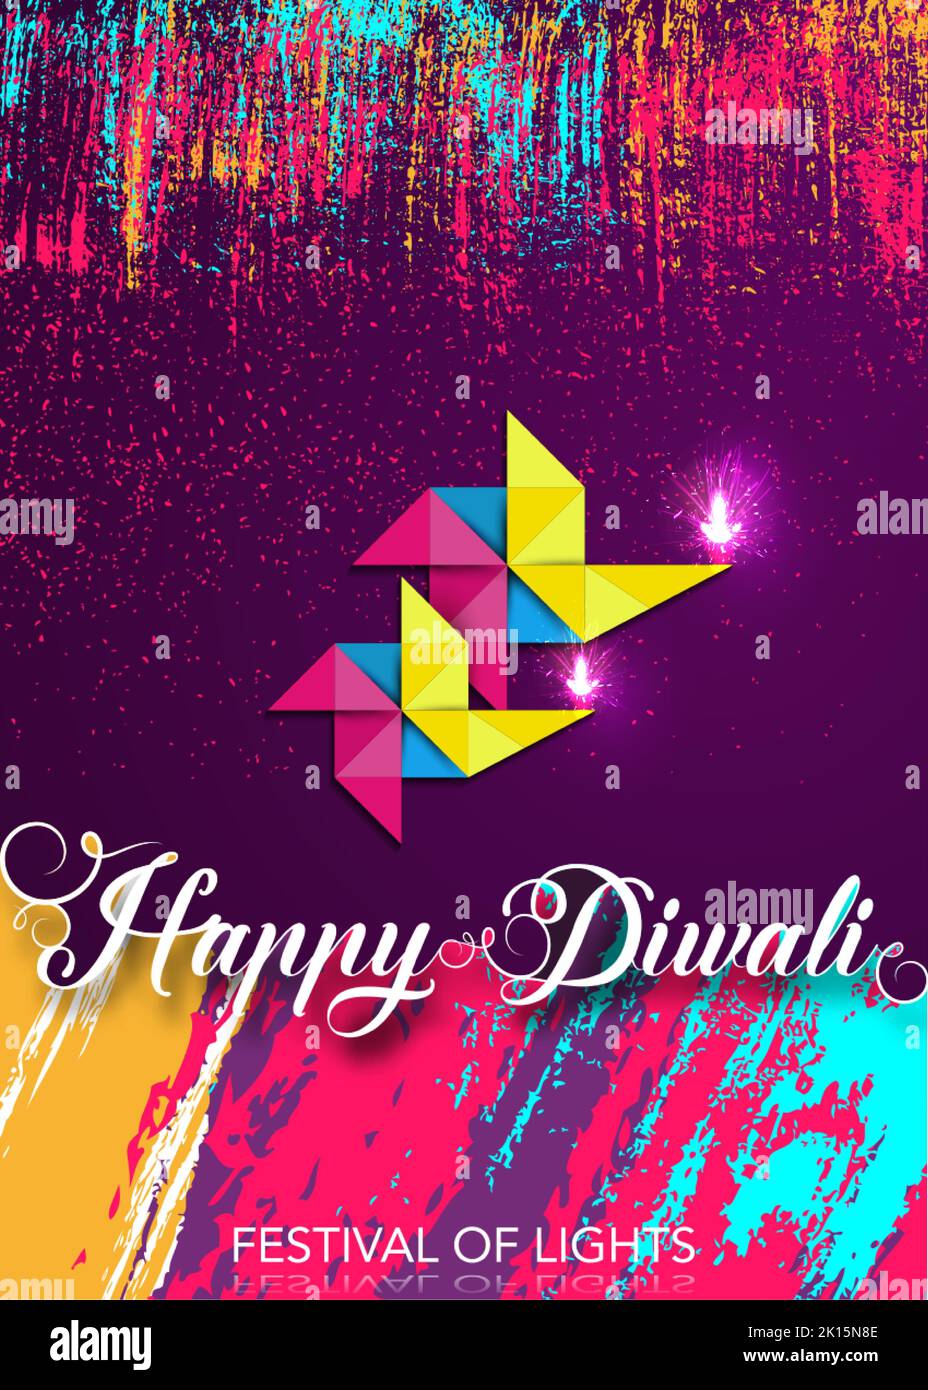 Happy Diwali Festival of Lights Celebration colorful template in Origami paper Graphic design of Indian Diya Oil Lamps, Modern Flat Design. Banner Stock Vector